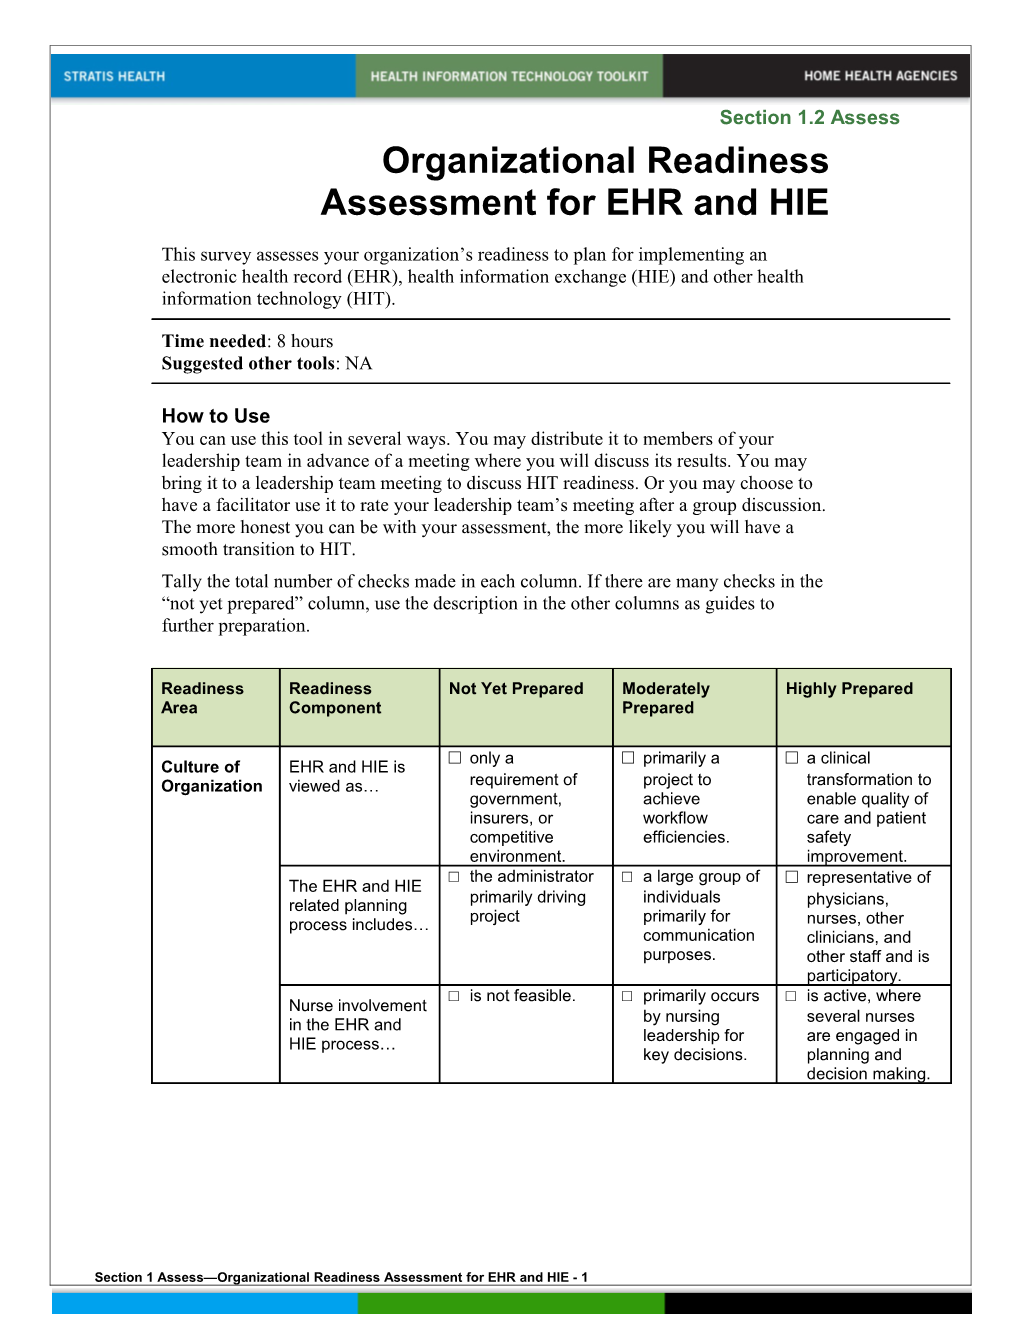 1 Organizational Readiness Assessment for EHR and HIE